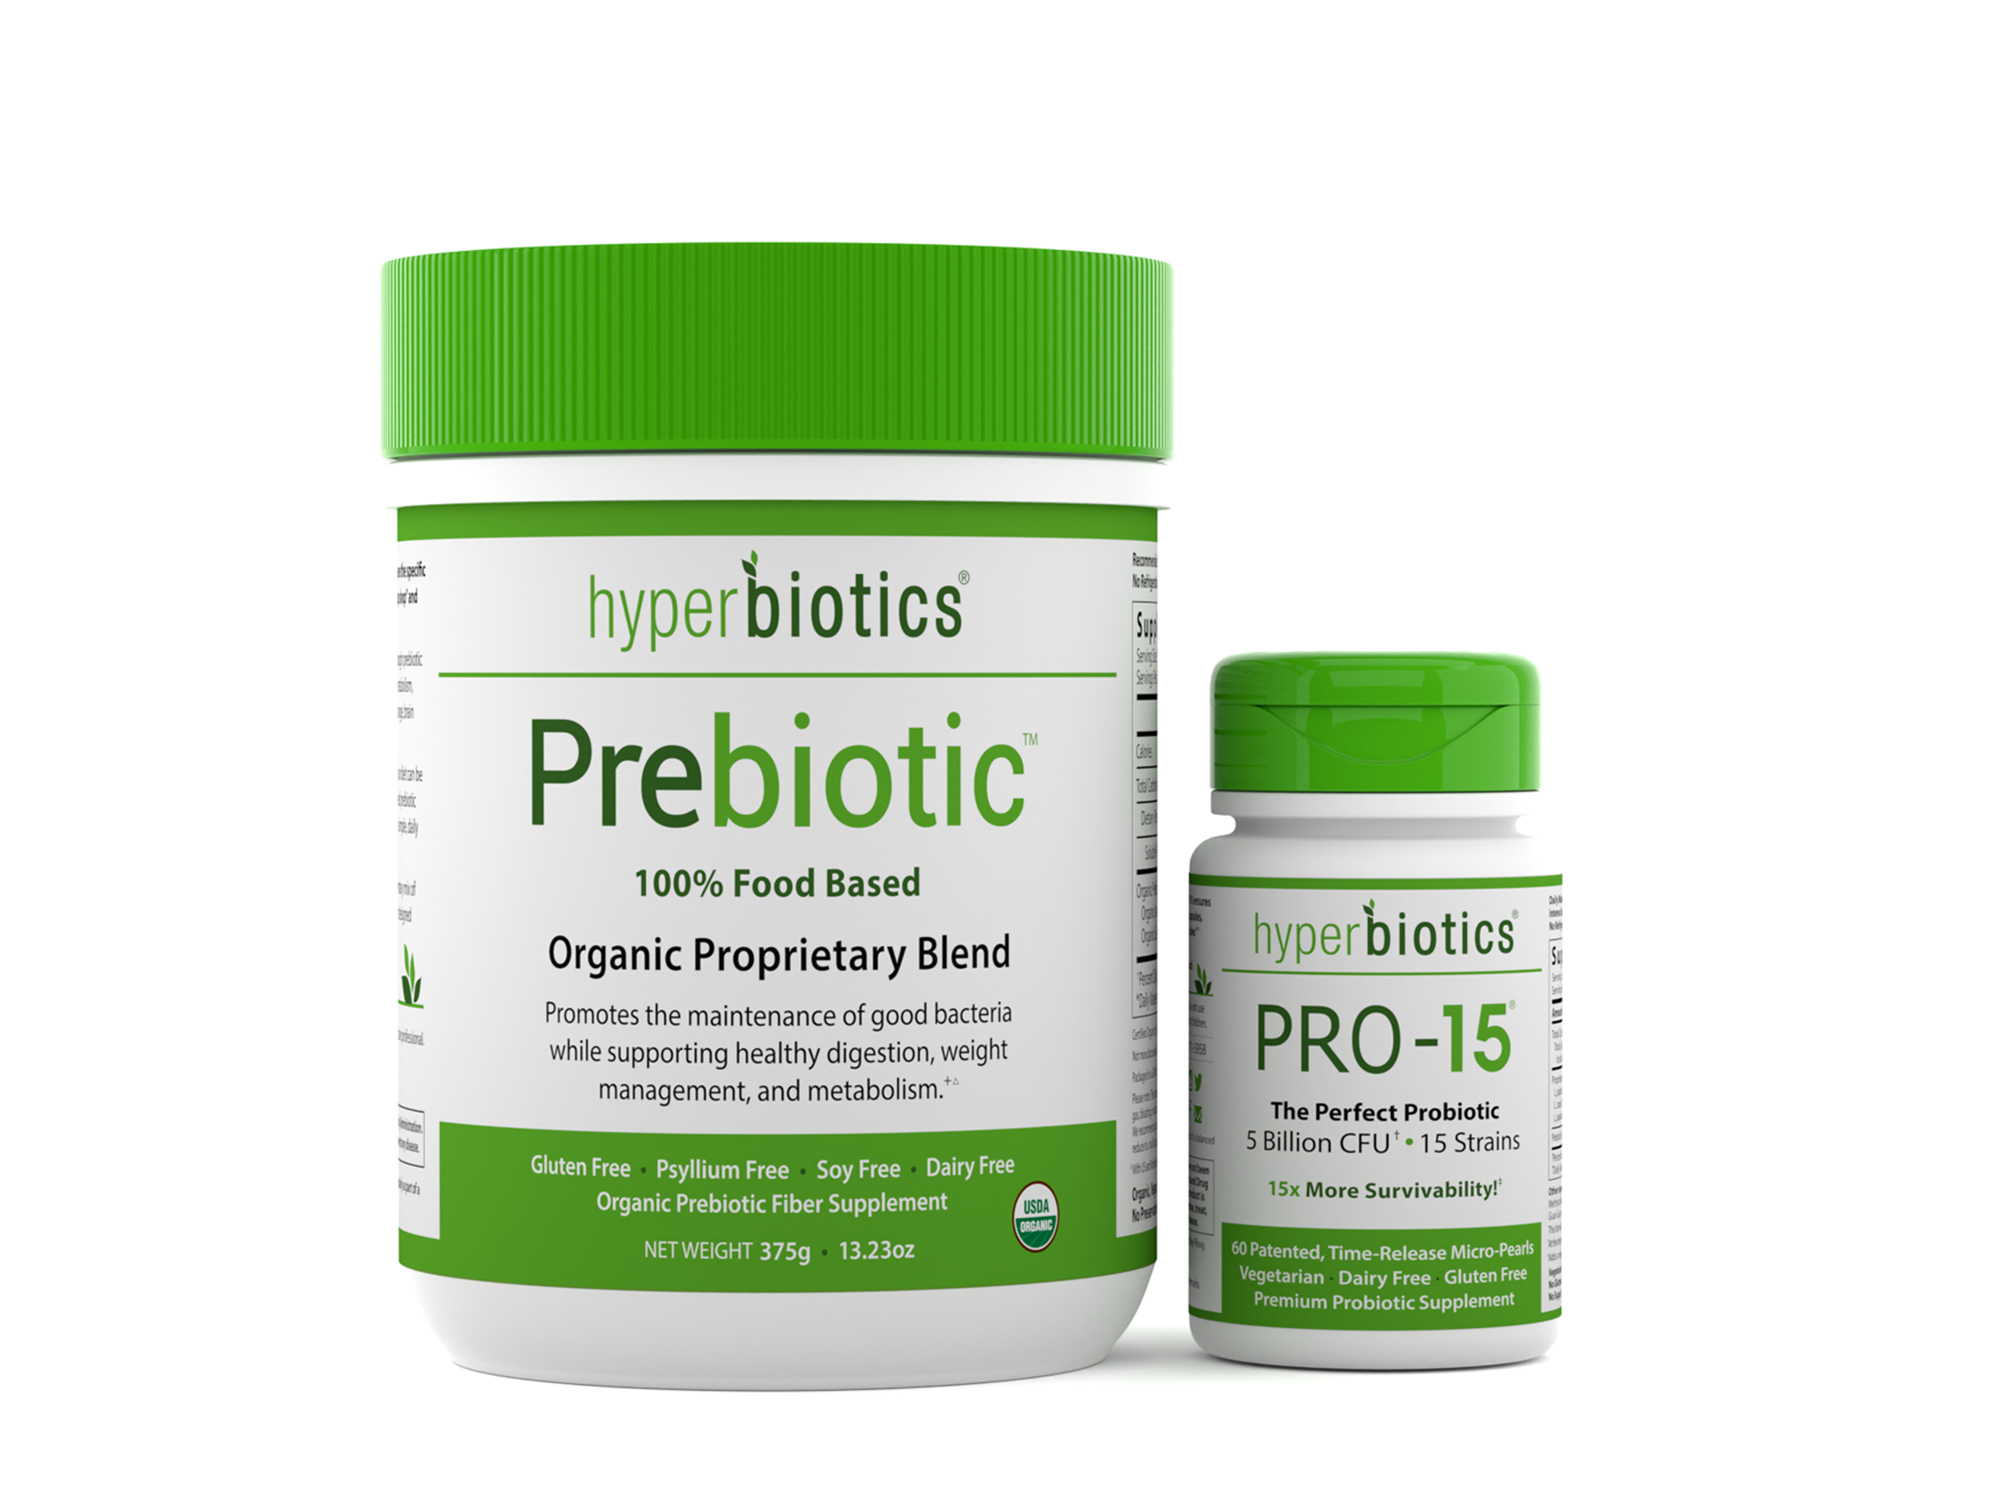 Digestive Starter Pack: The Perfect Duo for Your Digestive Health (with FREE Priority Shipping) - Hyperbiotics